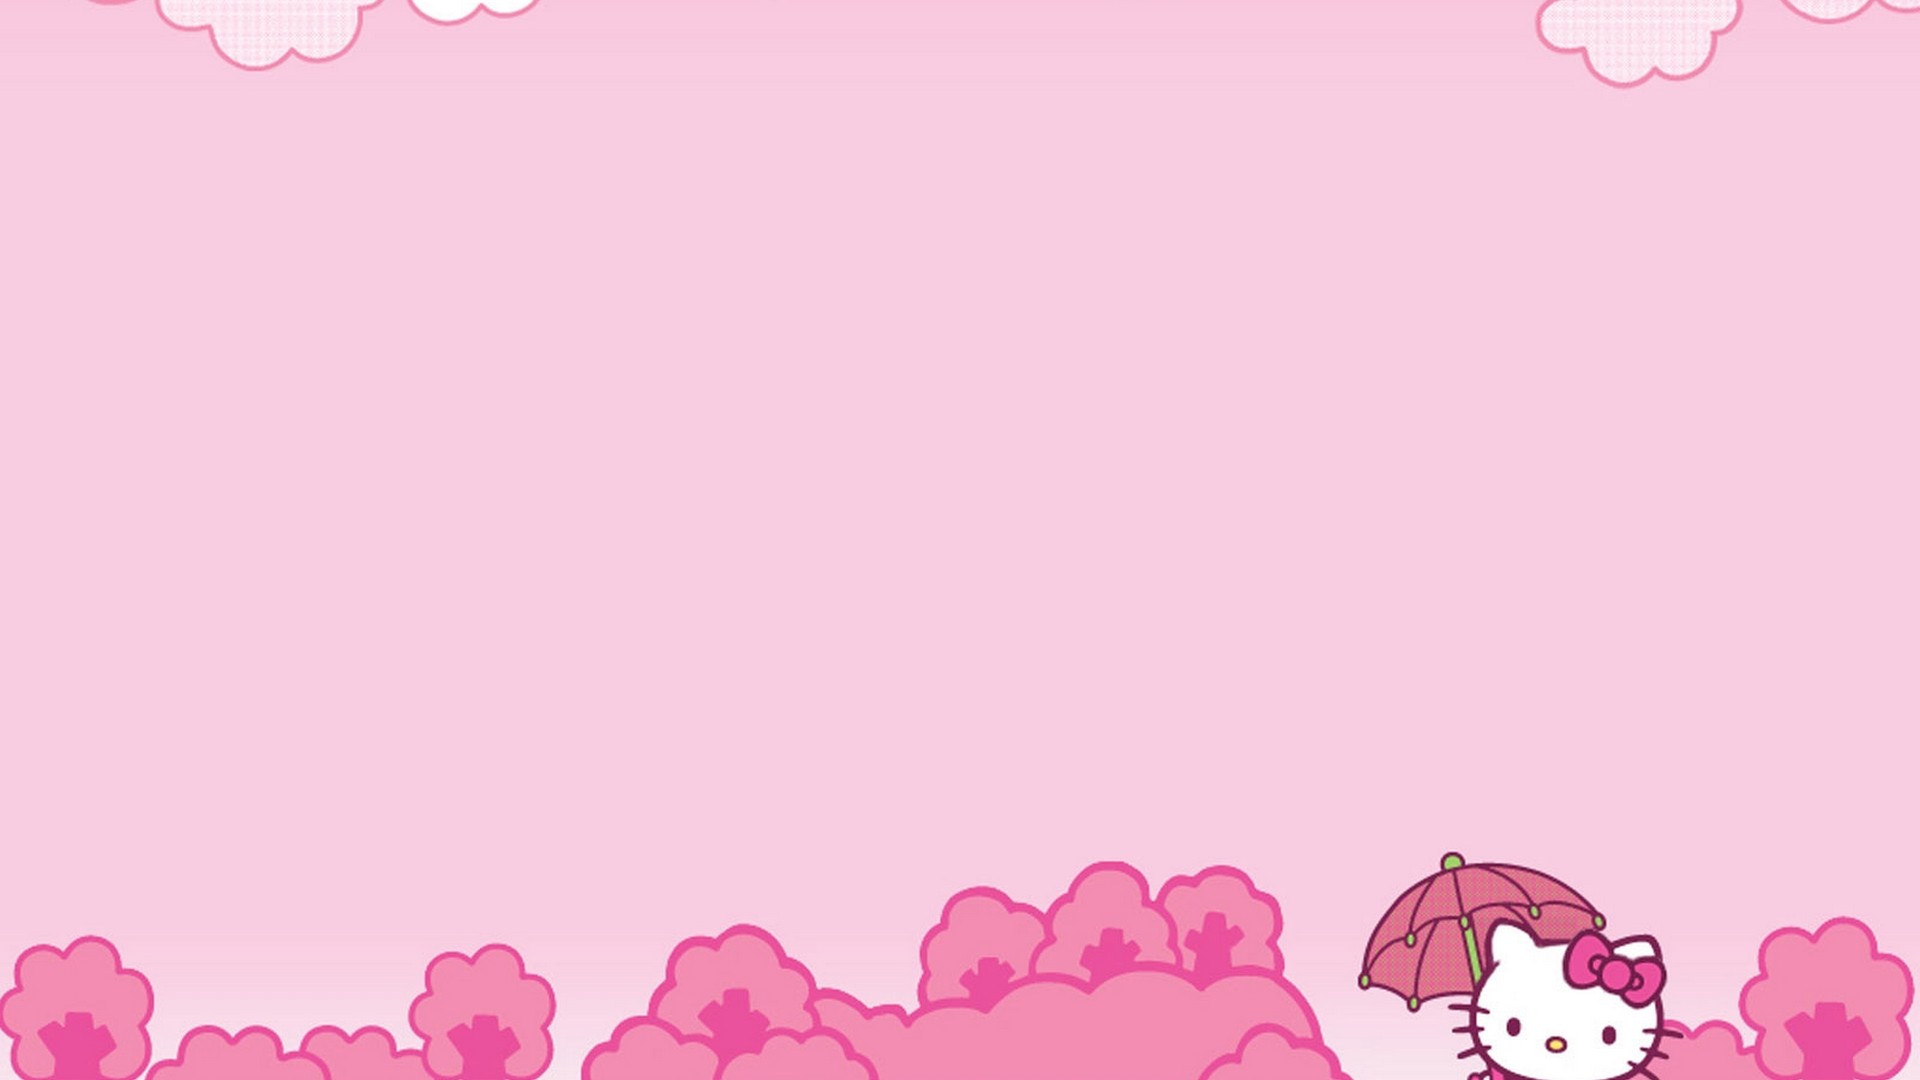 Wallpaper Hello Kitty Images HD with image resolution 1920x1080 pixel. You can make this wallpaper for your Desktop Computer Backgrounds, Mac Wallpapers, Android Lock screen or iPhone Screensavers